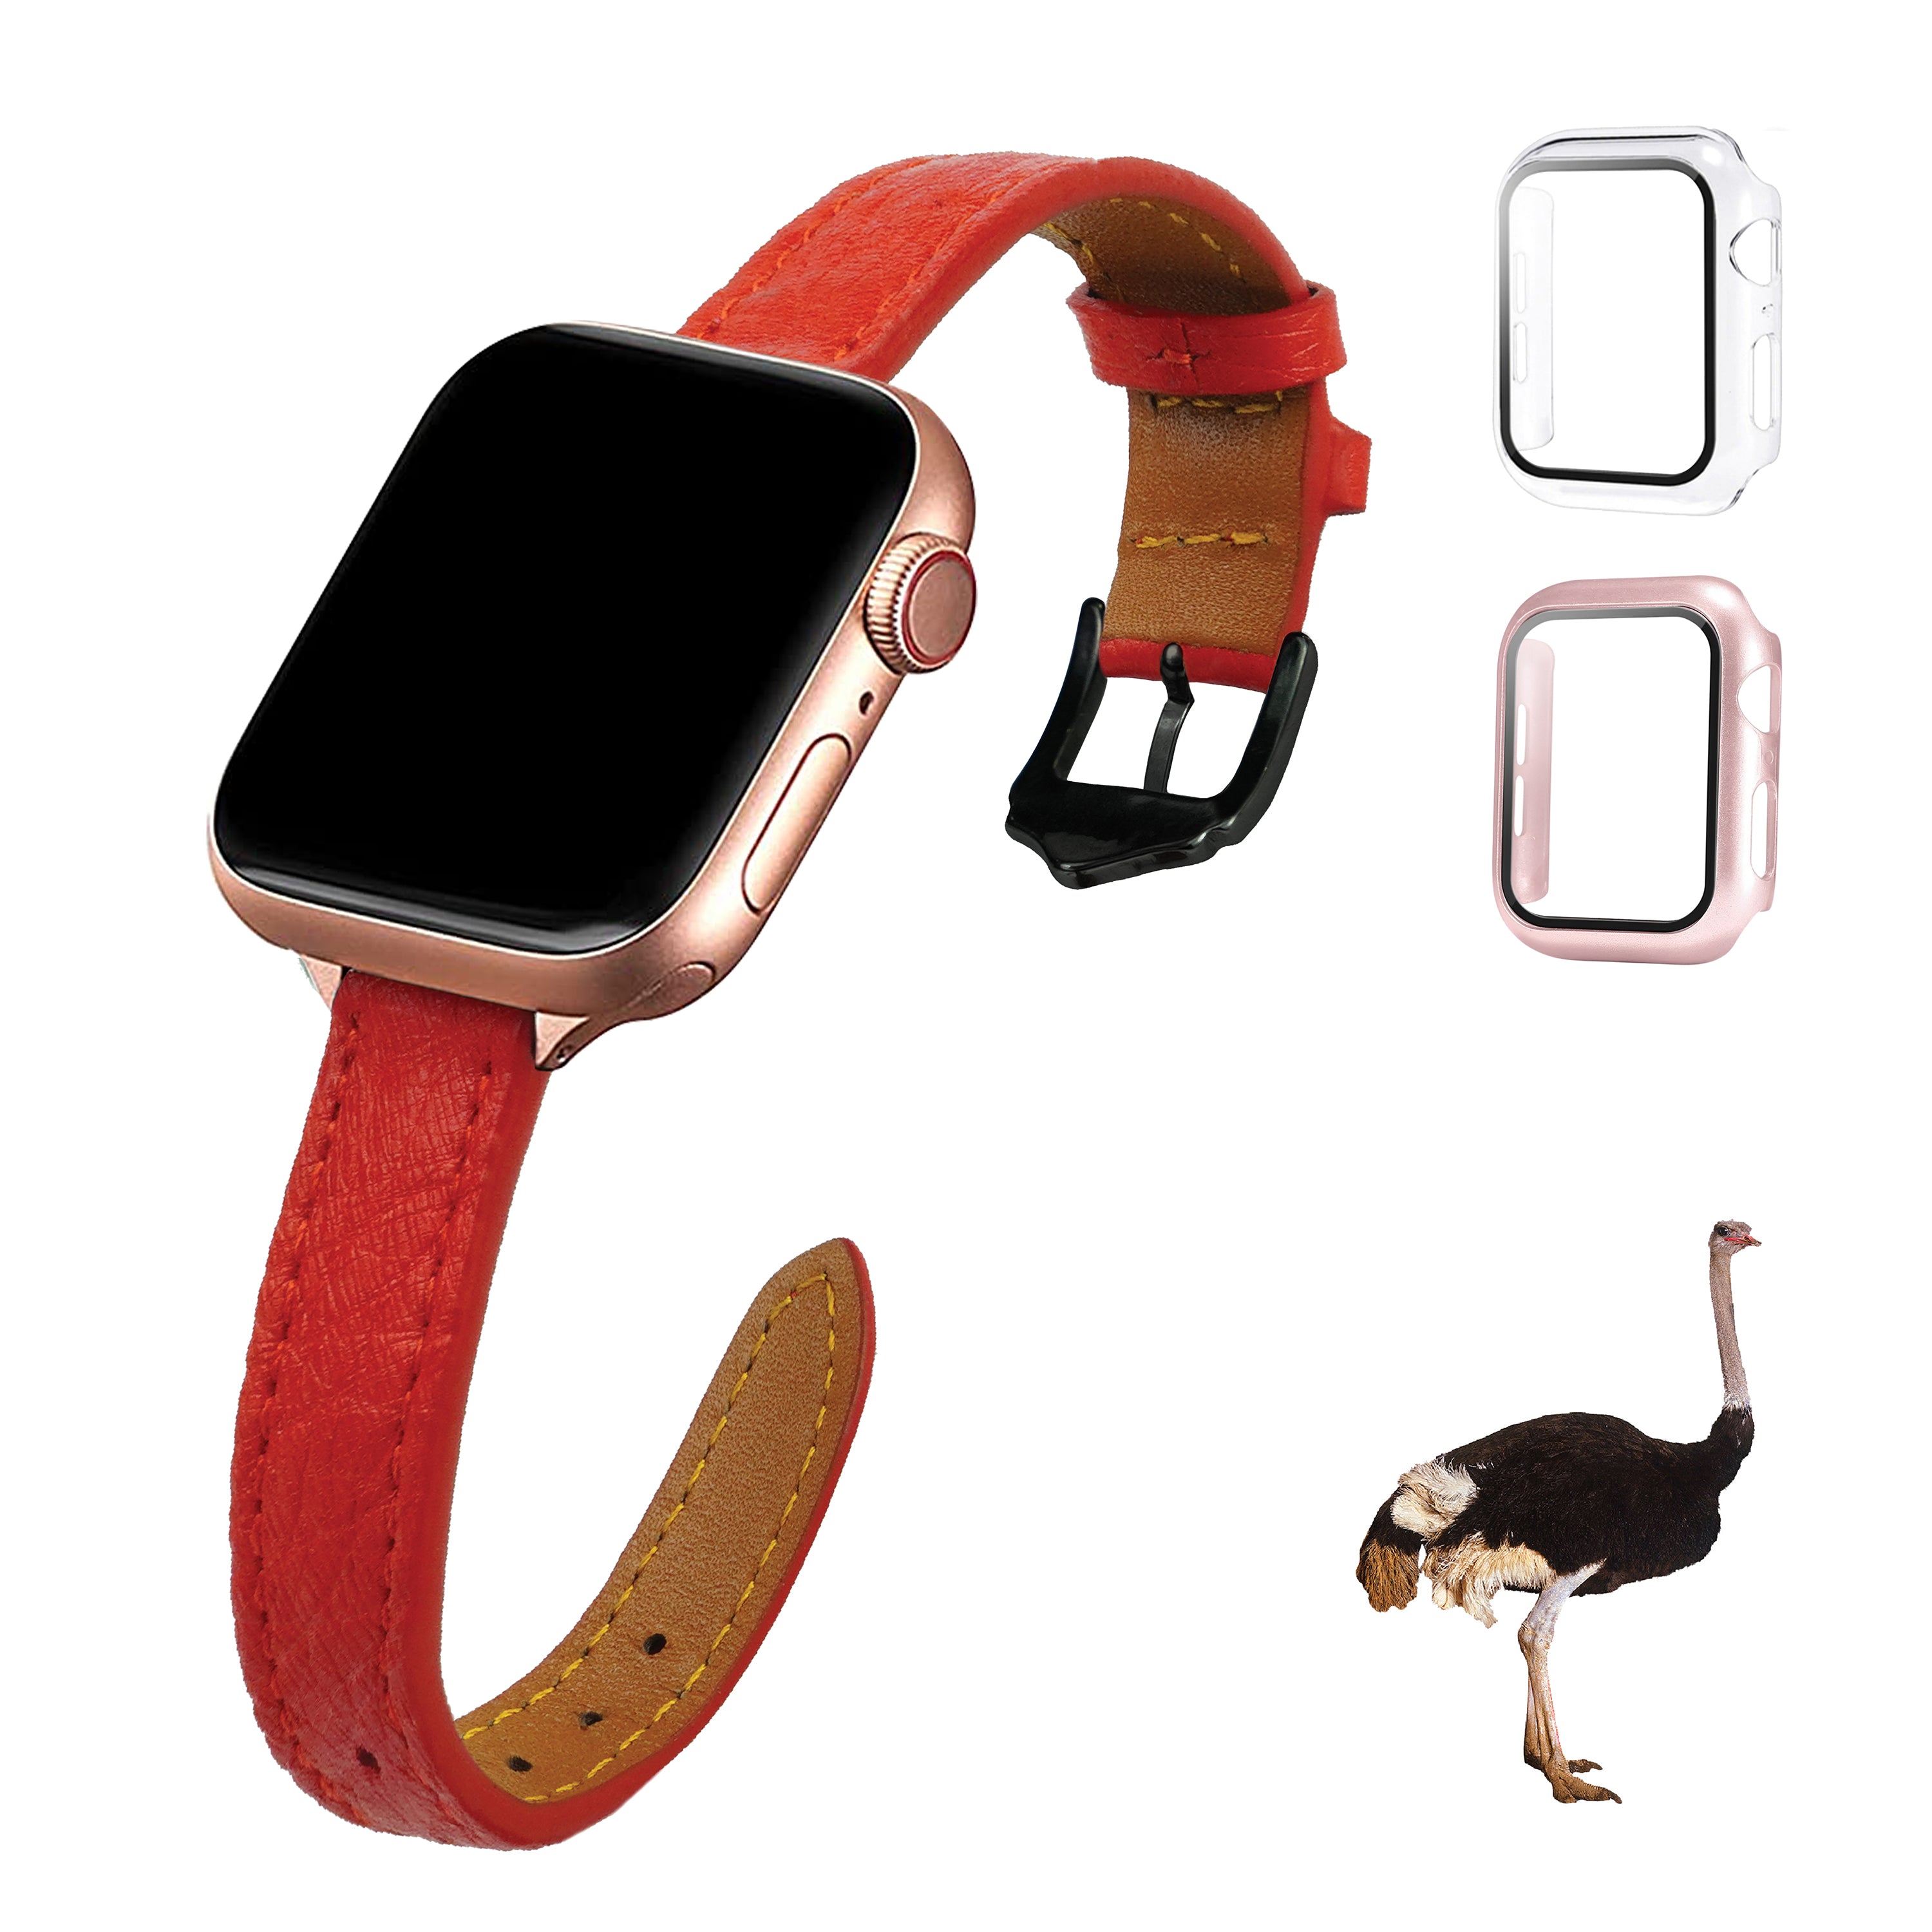 Red Flat Ostrich Leather Band Compatible Apple Watch Iwatch 40mm Screen Protector Case Black Adapter Replacement Strap For Smartwatch Series 4 5 6 SE Leather Handmade AW-190B-W-40MM